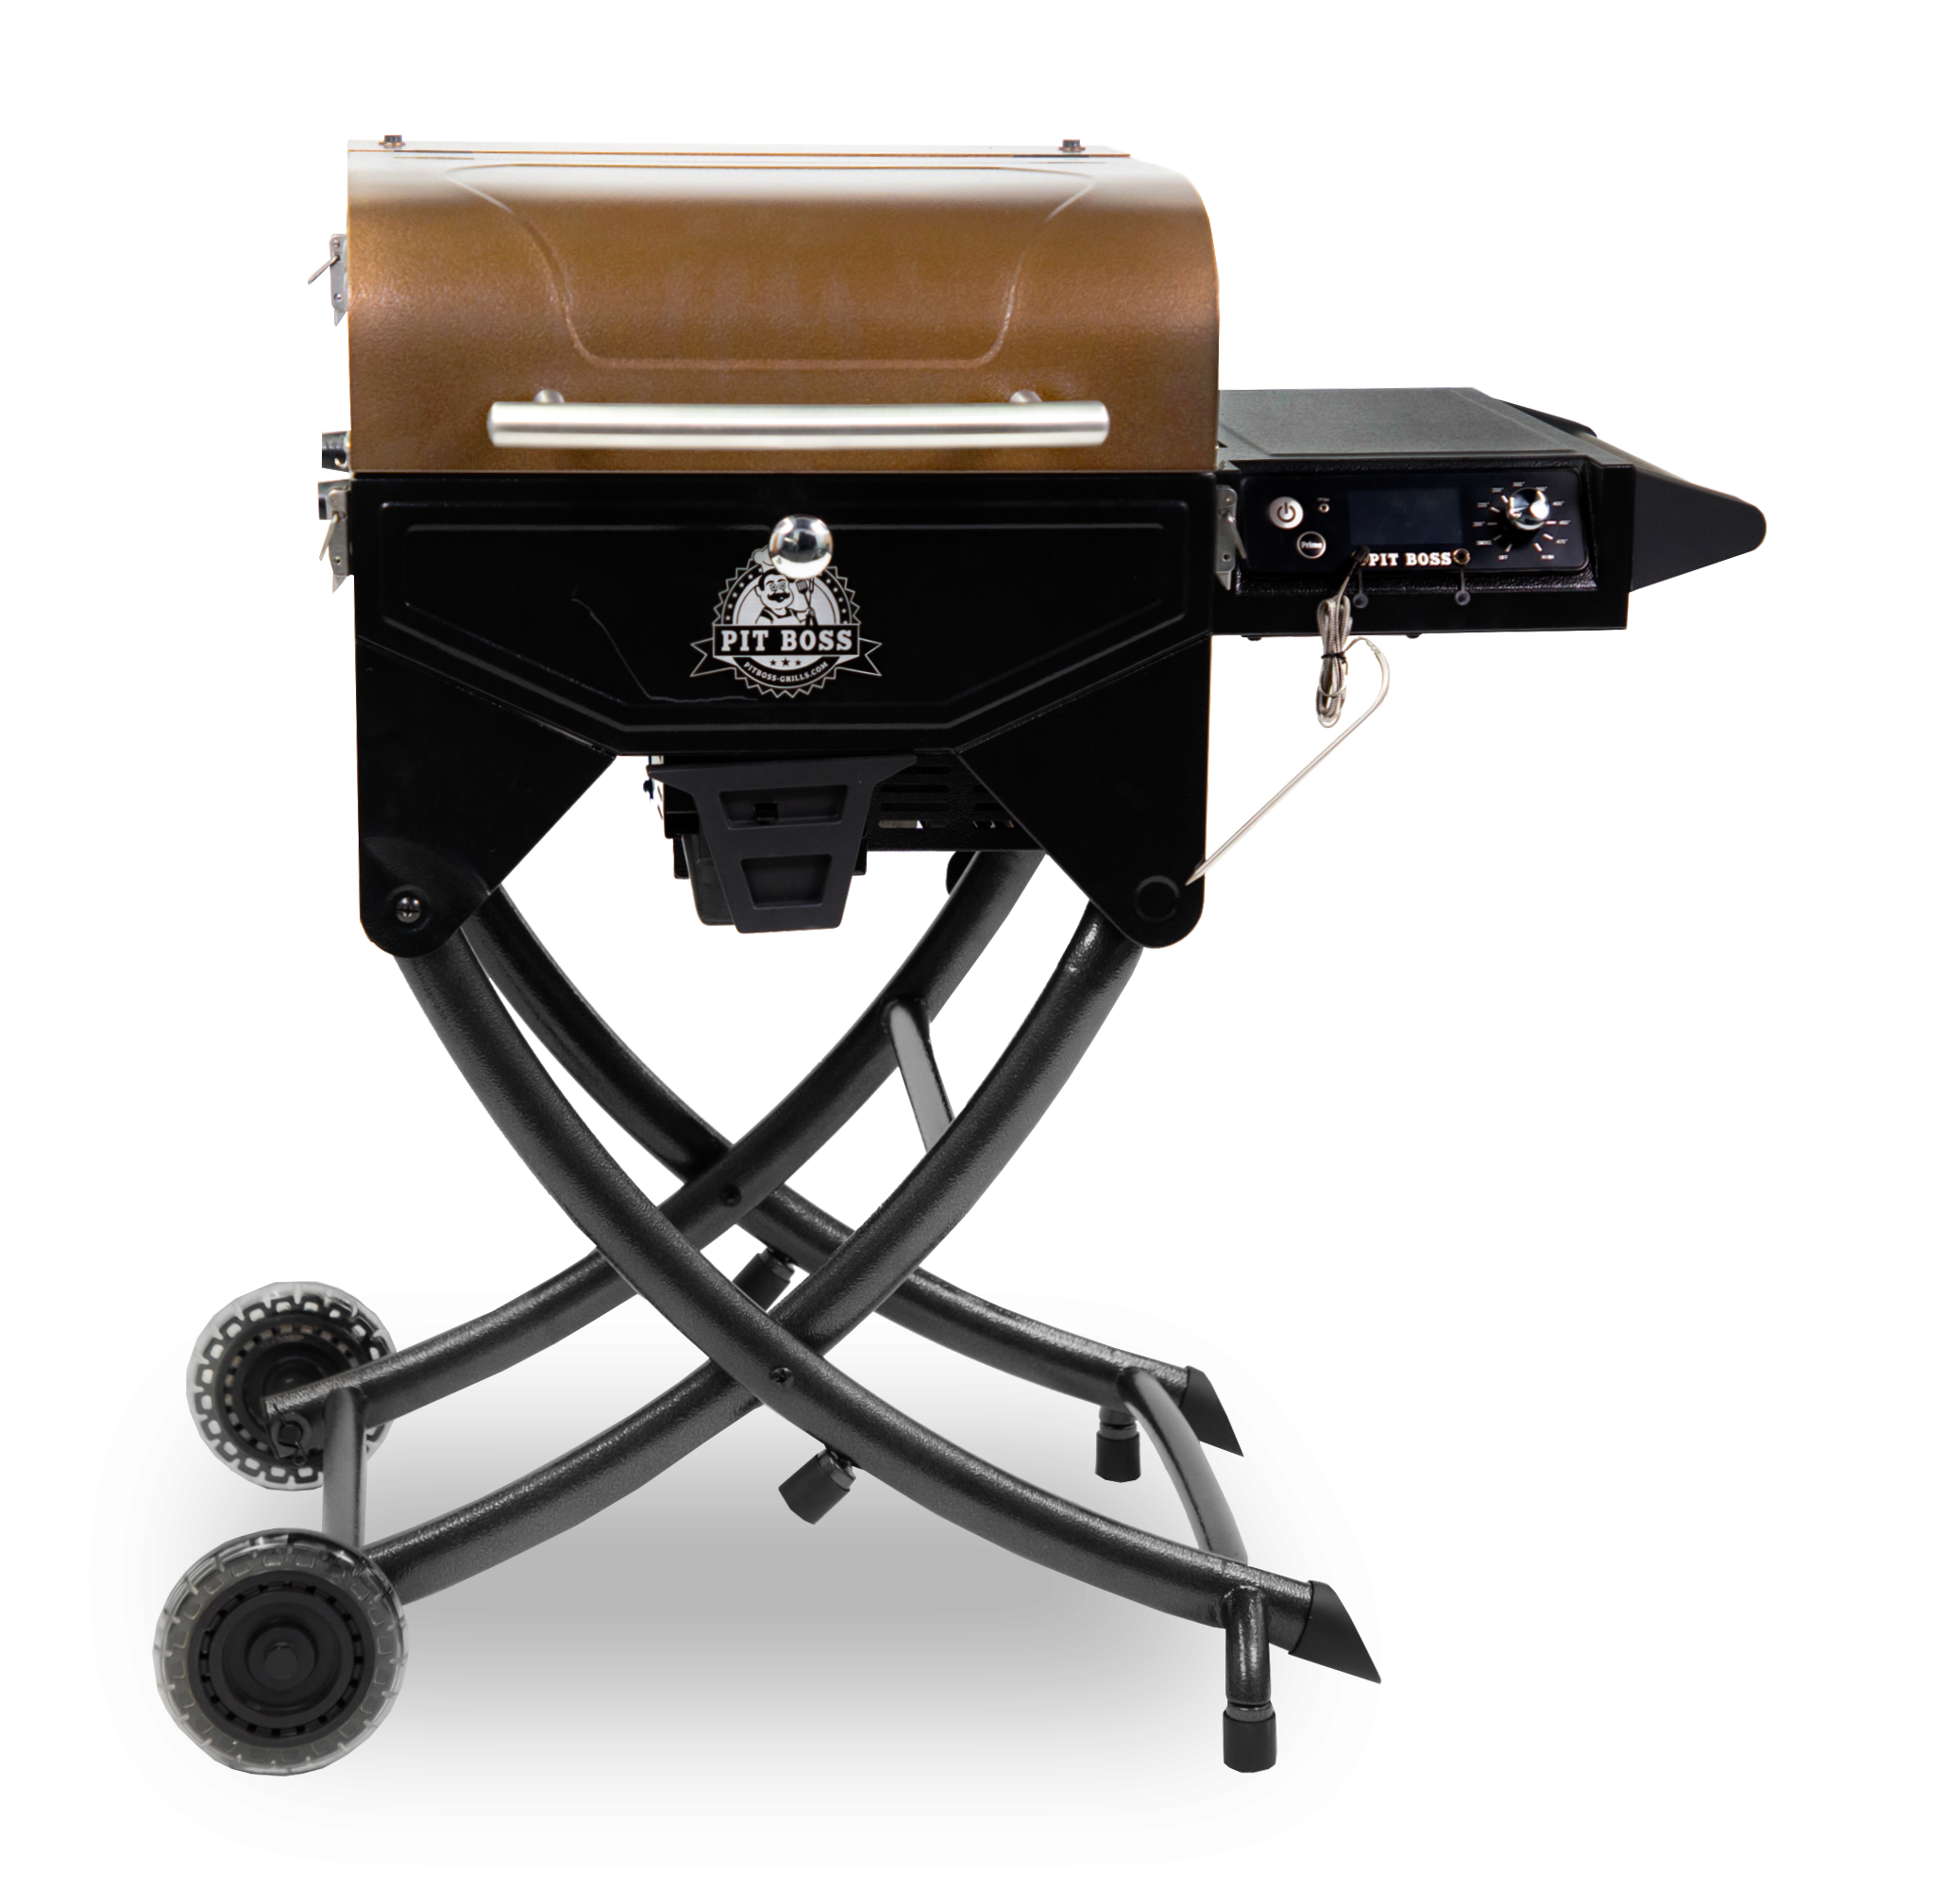 Pit Boss Portable Wood Pellet Grill, Pit Stop Smoker with foldable legs - image 1 of 8